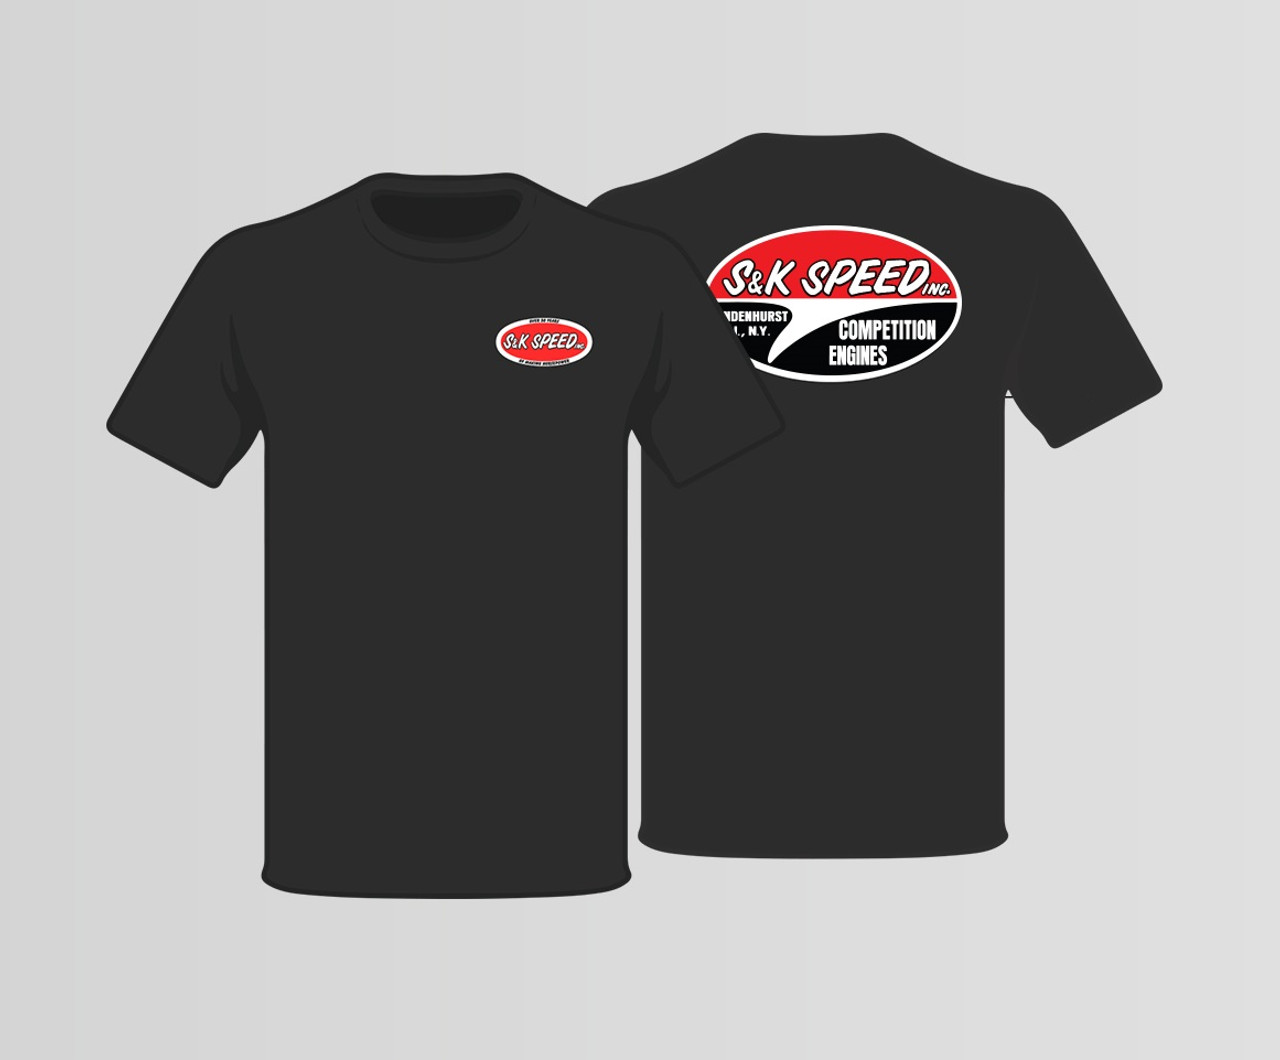 SK Speed T Shirt - Competition Engines - Black - Extra Large (XL)